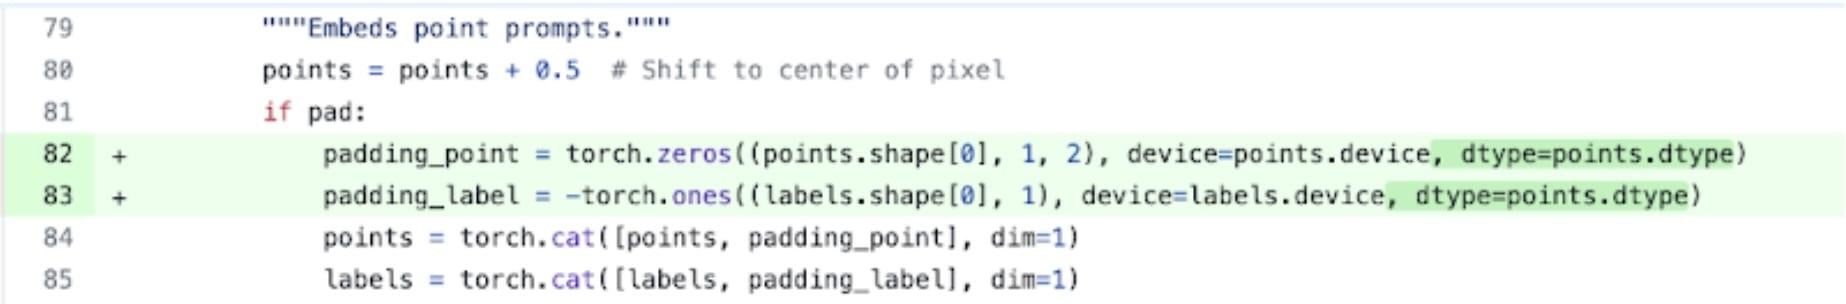 replacing padding dtypes with half precision, bfloat16